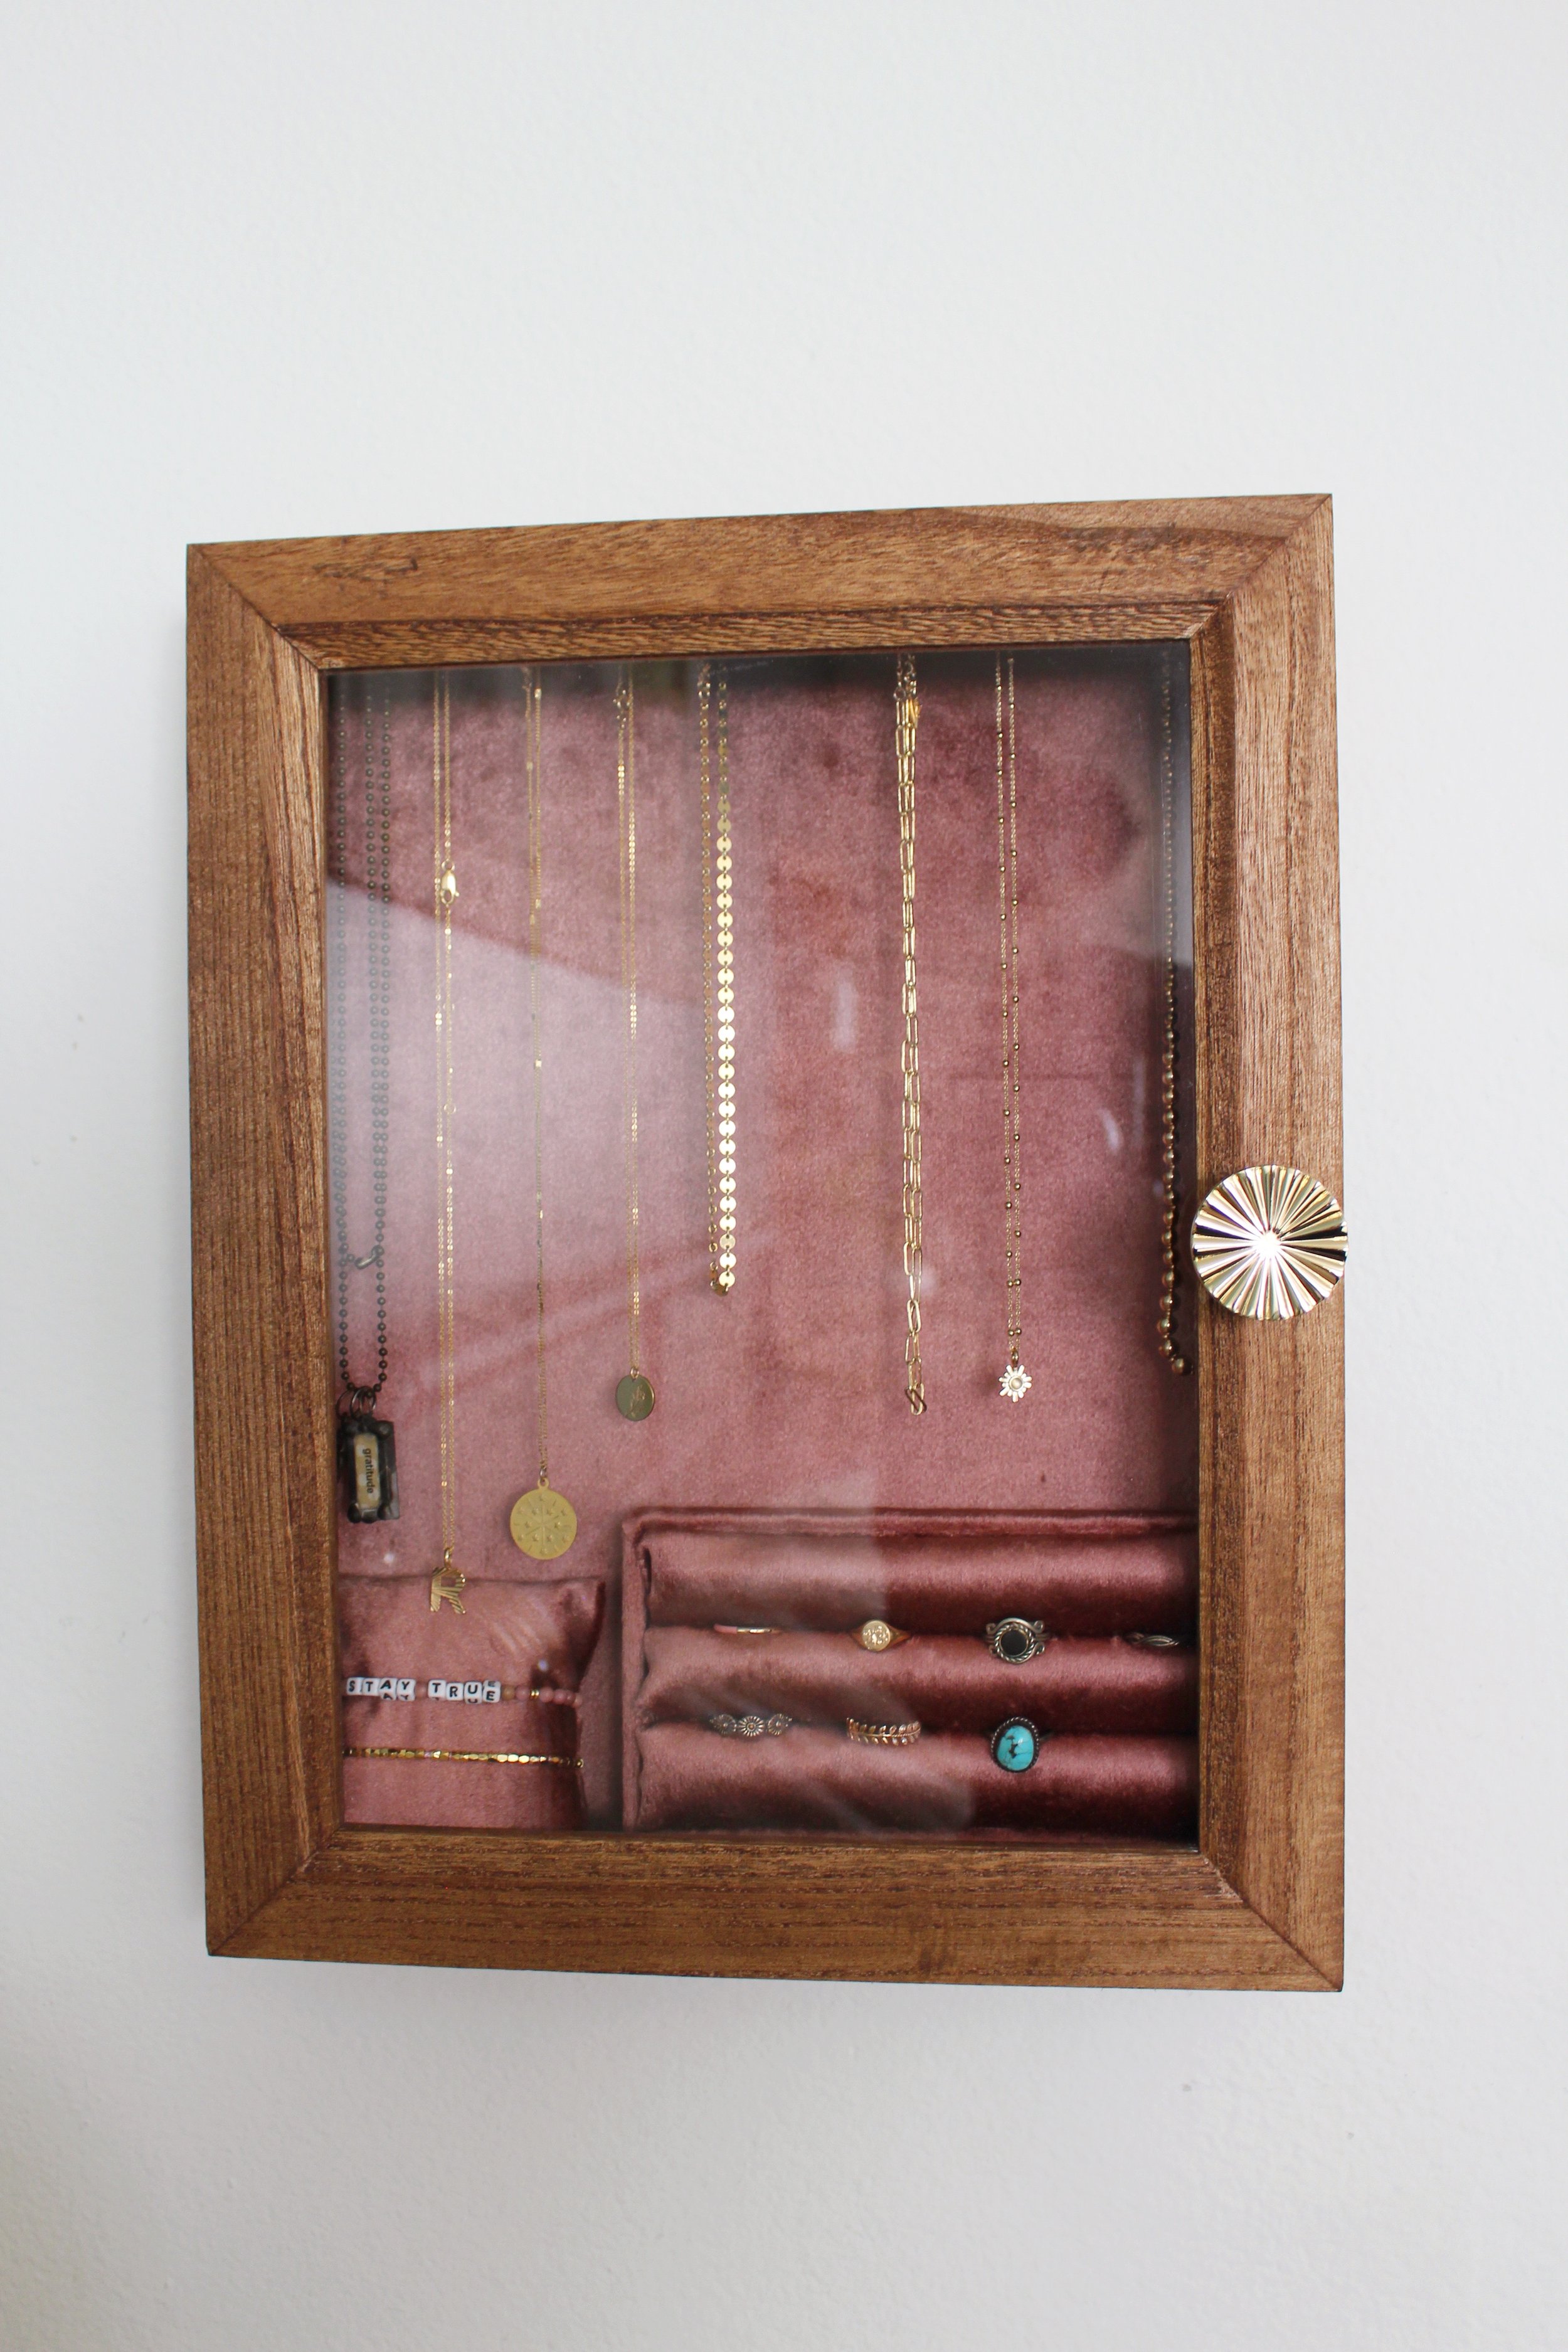 How to Upcycle a Shadow Box into Jewelry Storage — Entertain the Idea